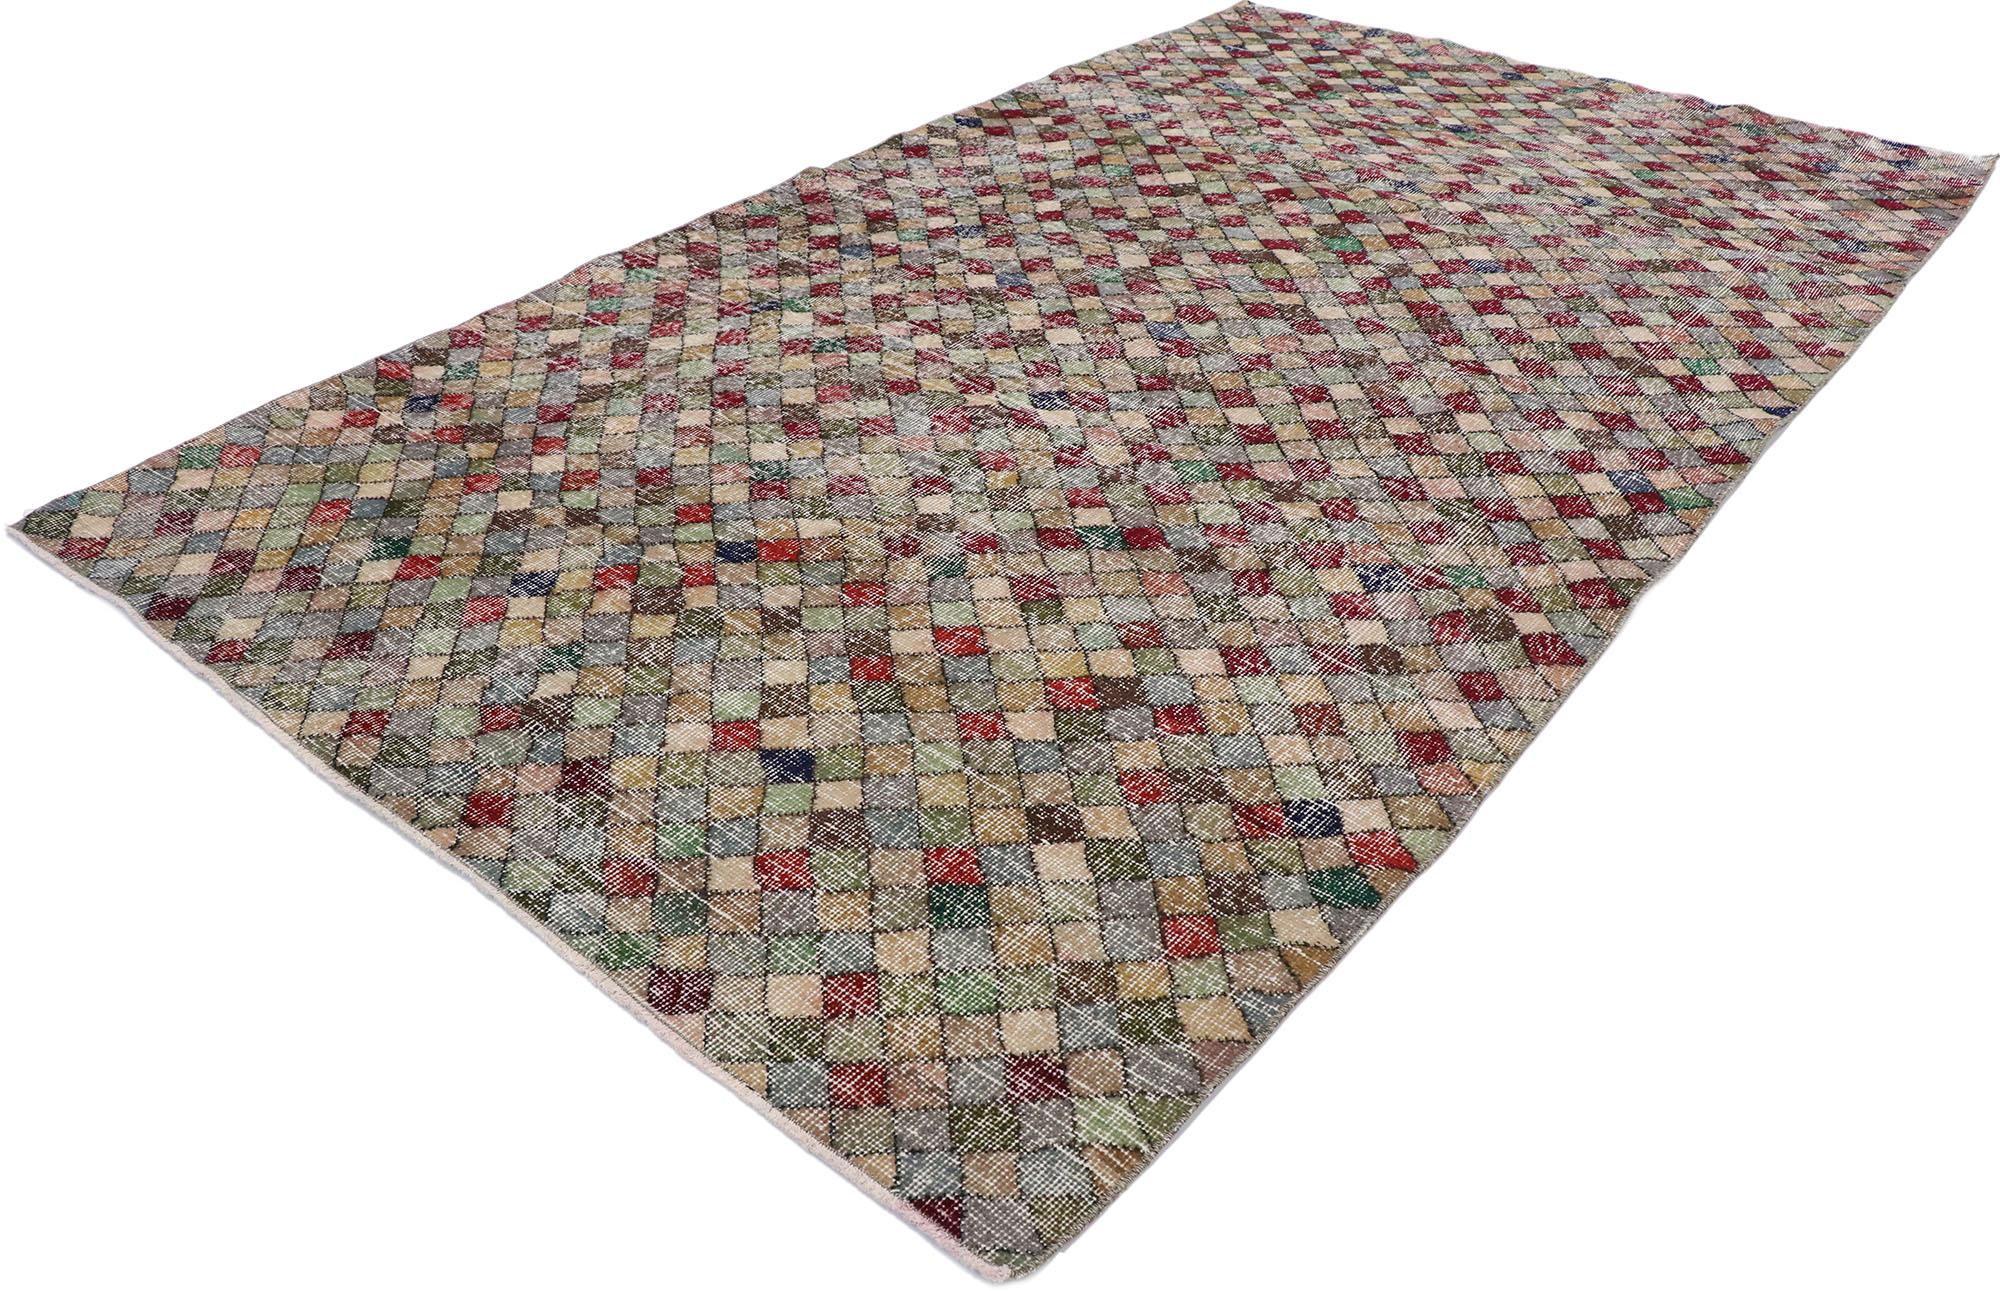 53290, distressed vintage Turkish Sivas rug with Rustic Mid-Century Modern style. This hand knotted wool distressed vintage Turkish Sivas rug features an all-over checkerboard pattern comprised of multicolored diamonds. Gentle waves of Abrash and